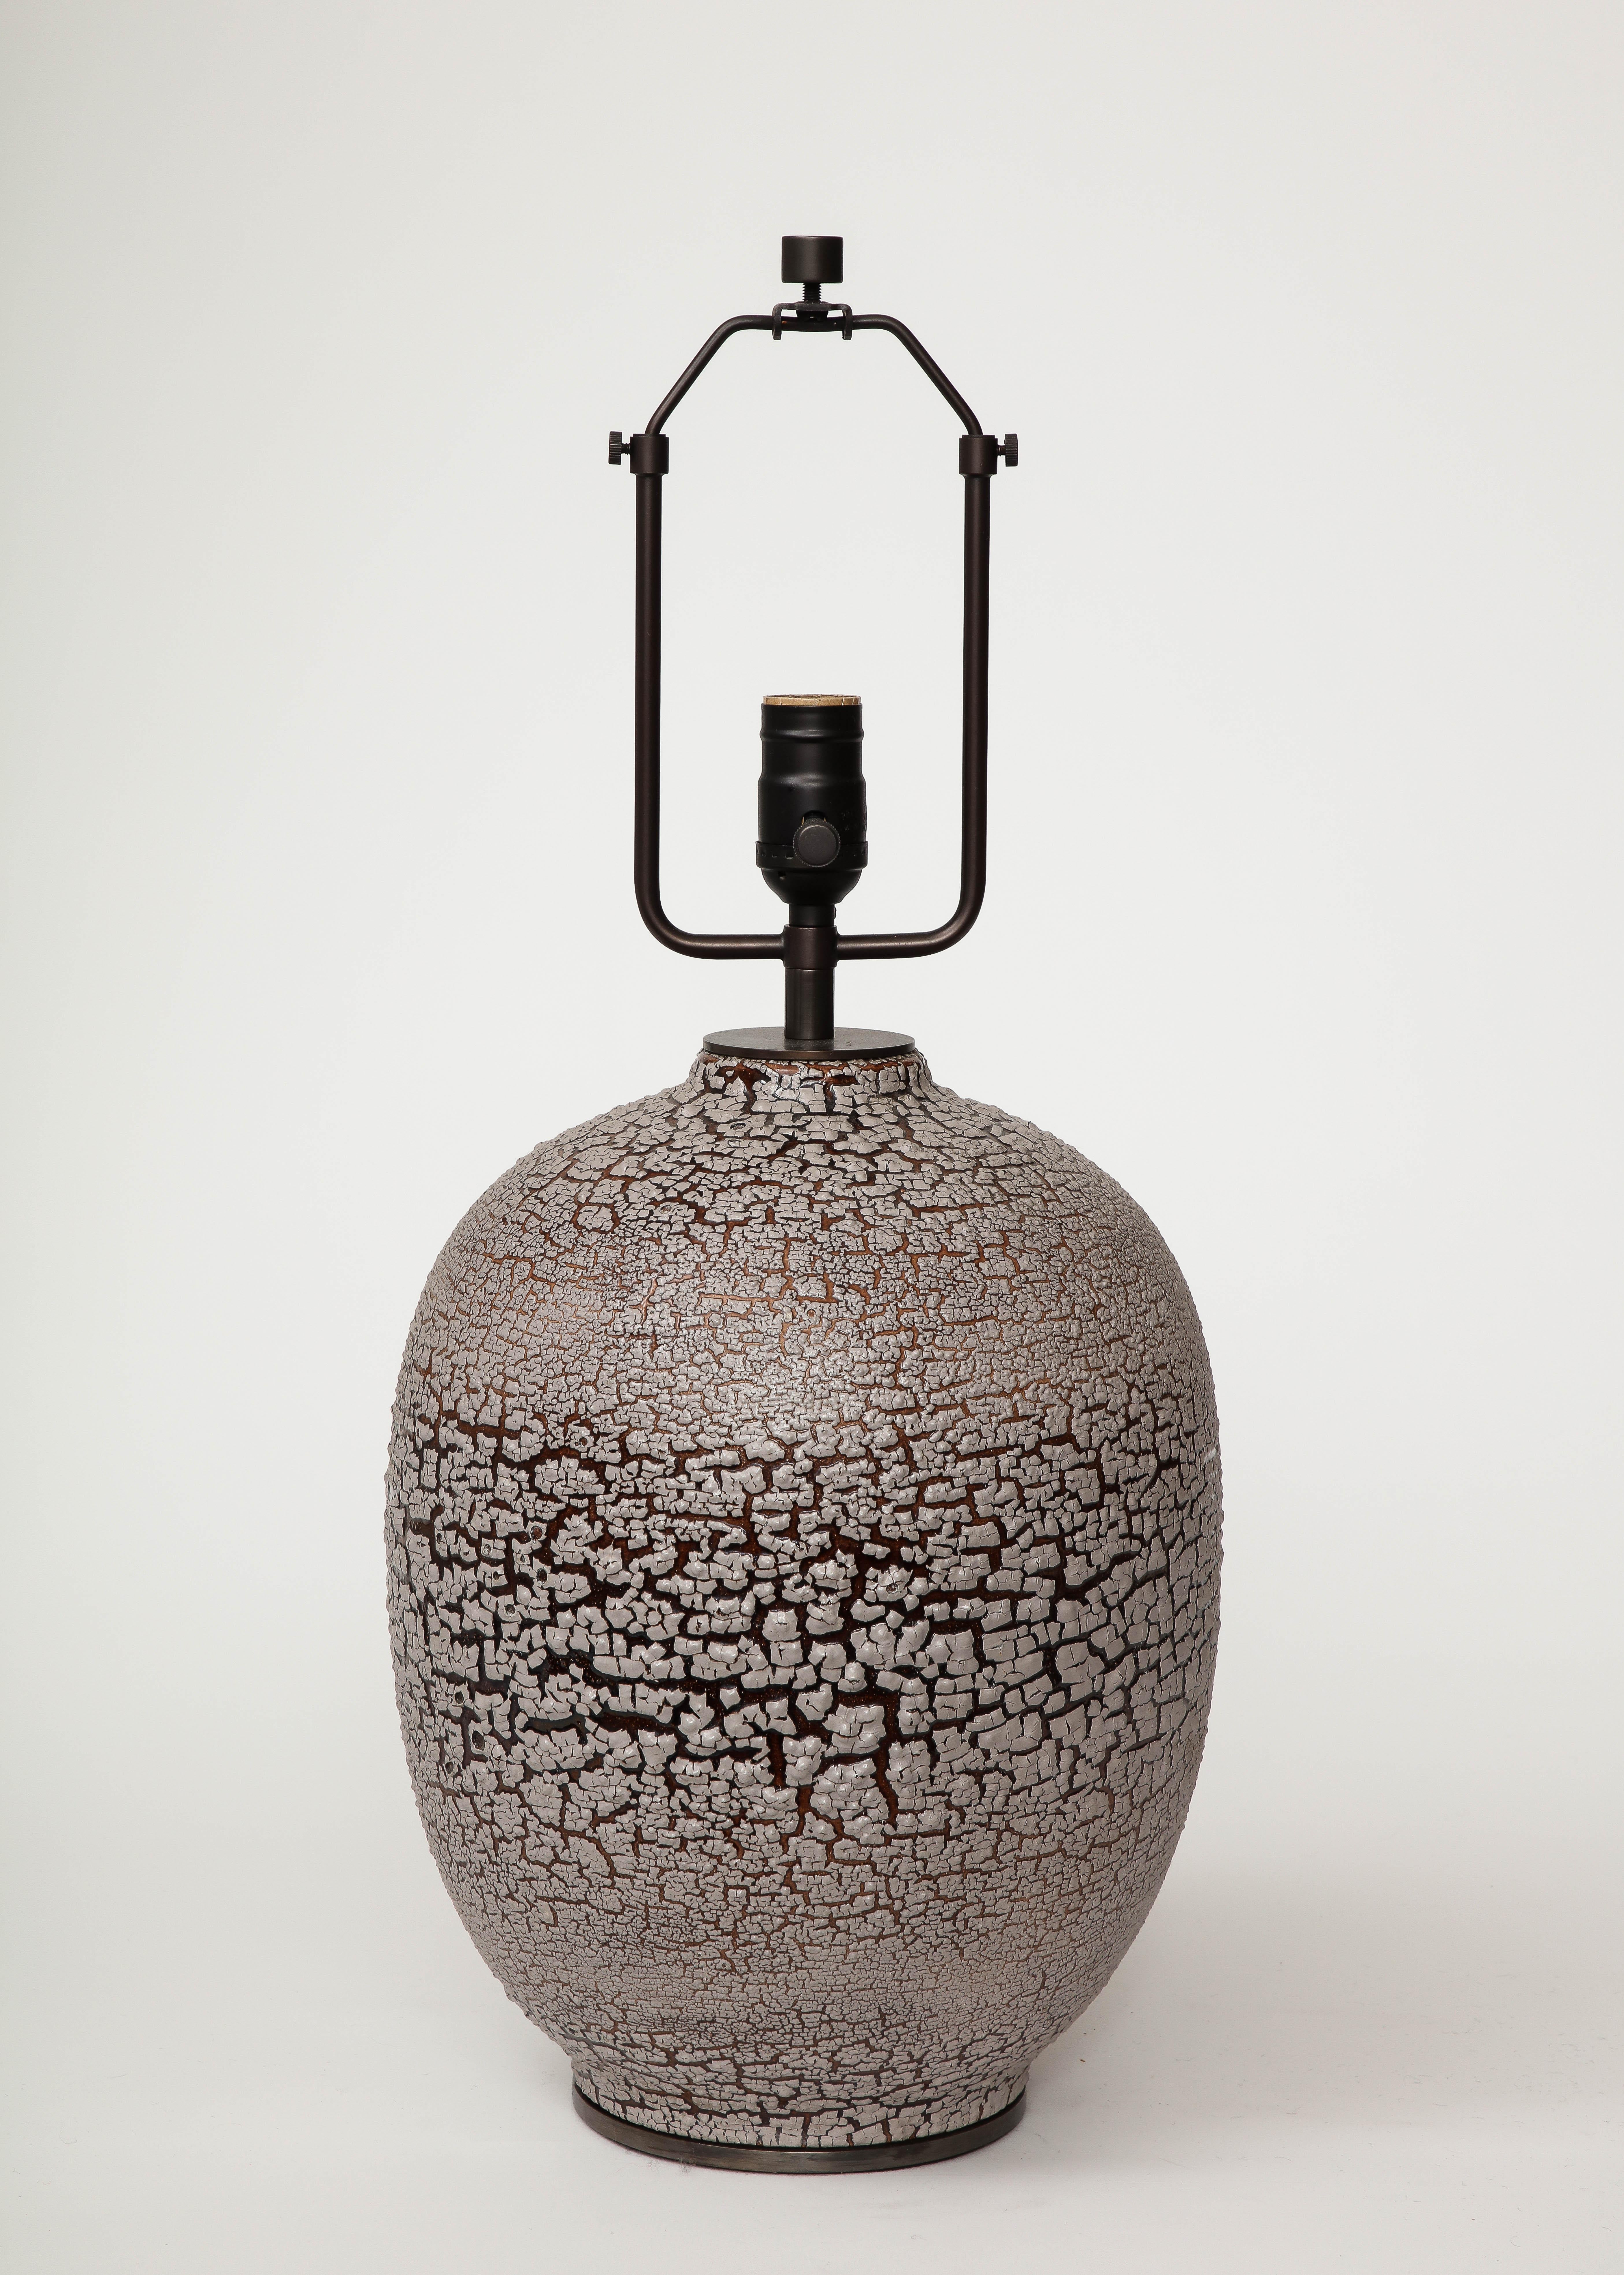 Crackle Glazed Ceramic Table Lamp, Keramos, France, c. 1950 In Good Condition For Sale In New York City, NY